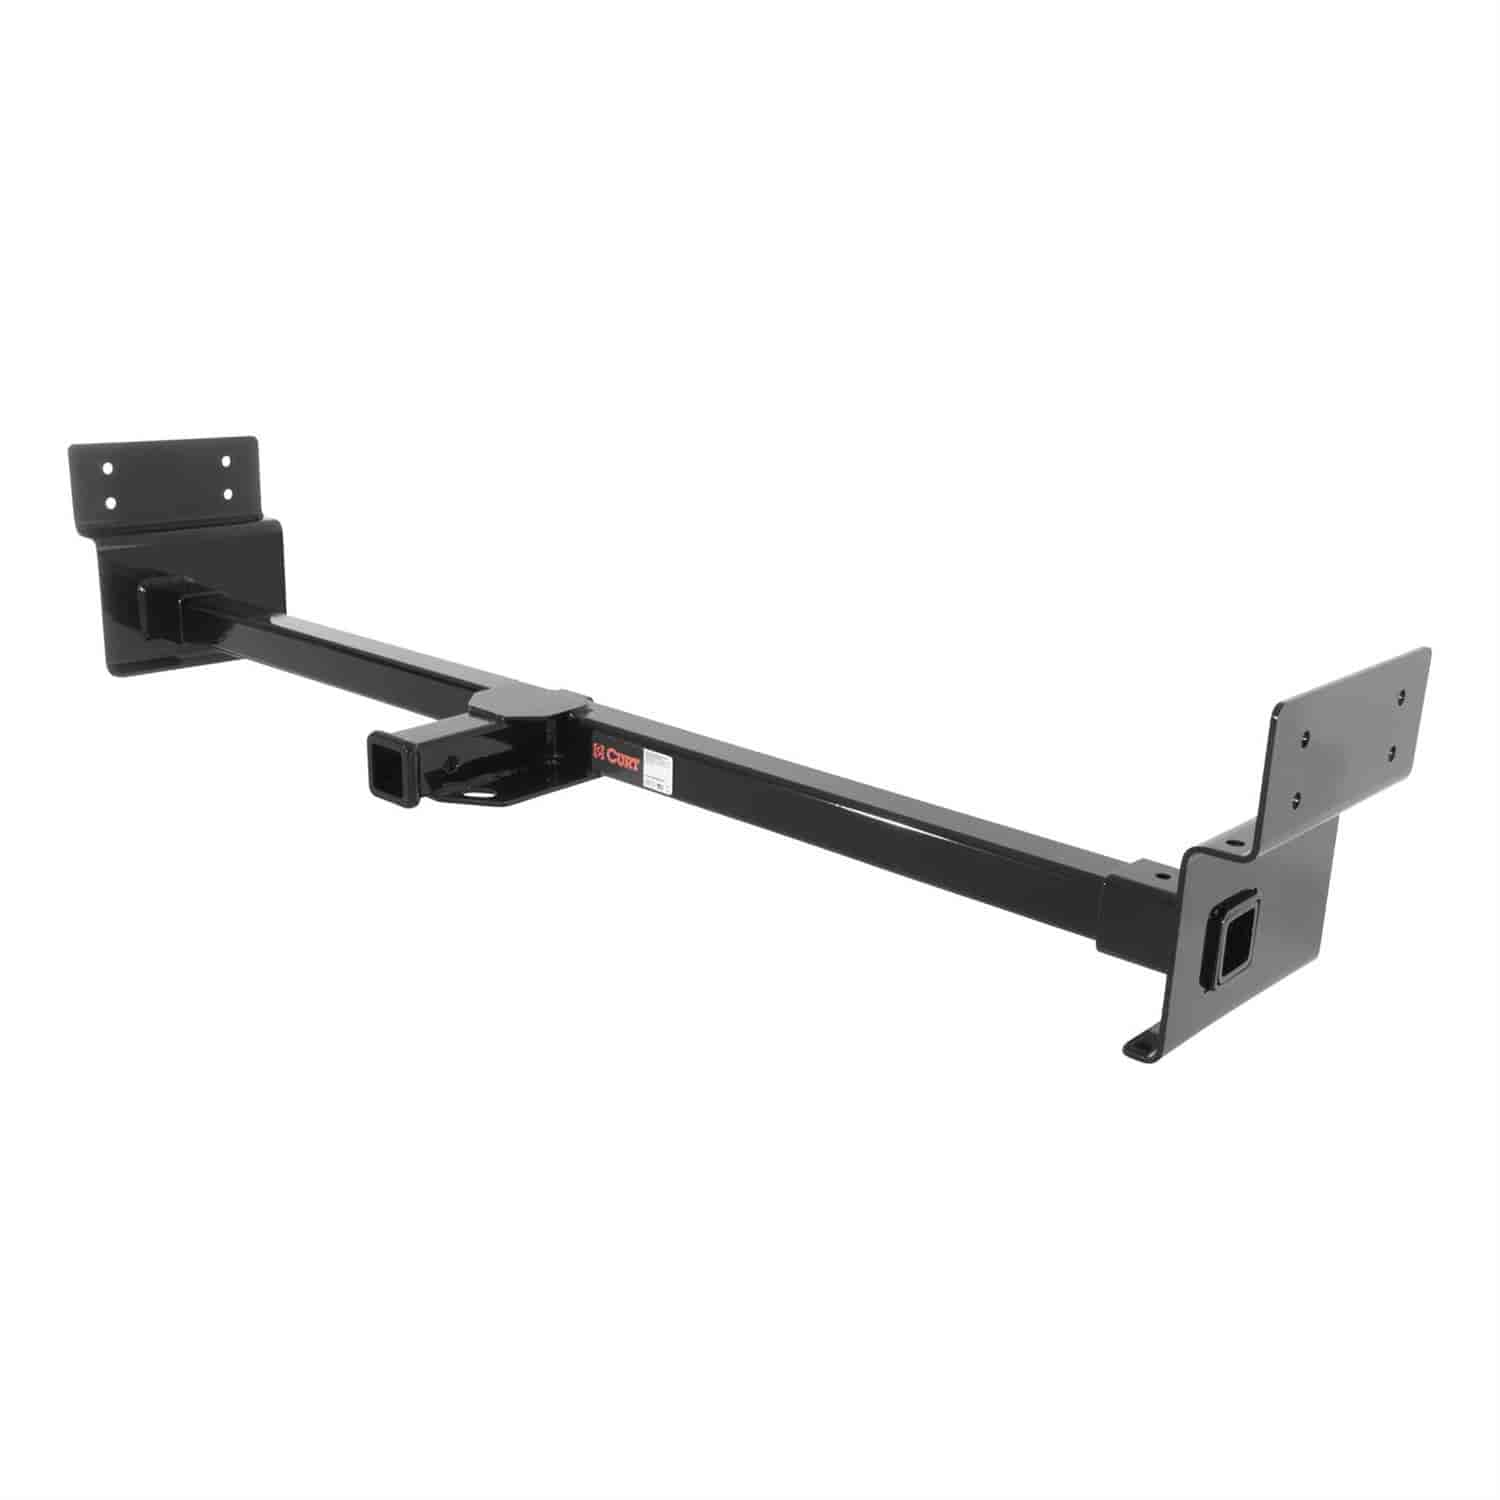 Class 3 Square Tube Adjustable Receiver Hitch Universal